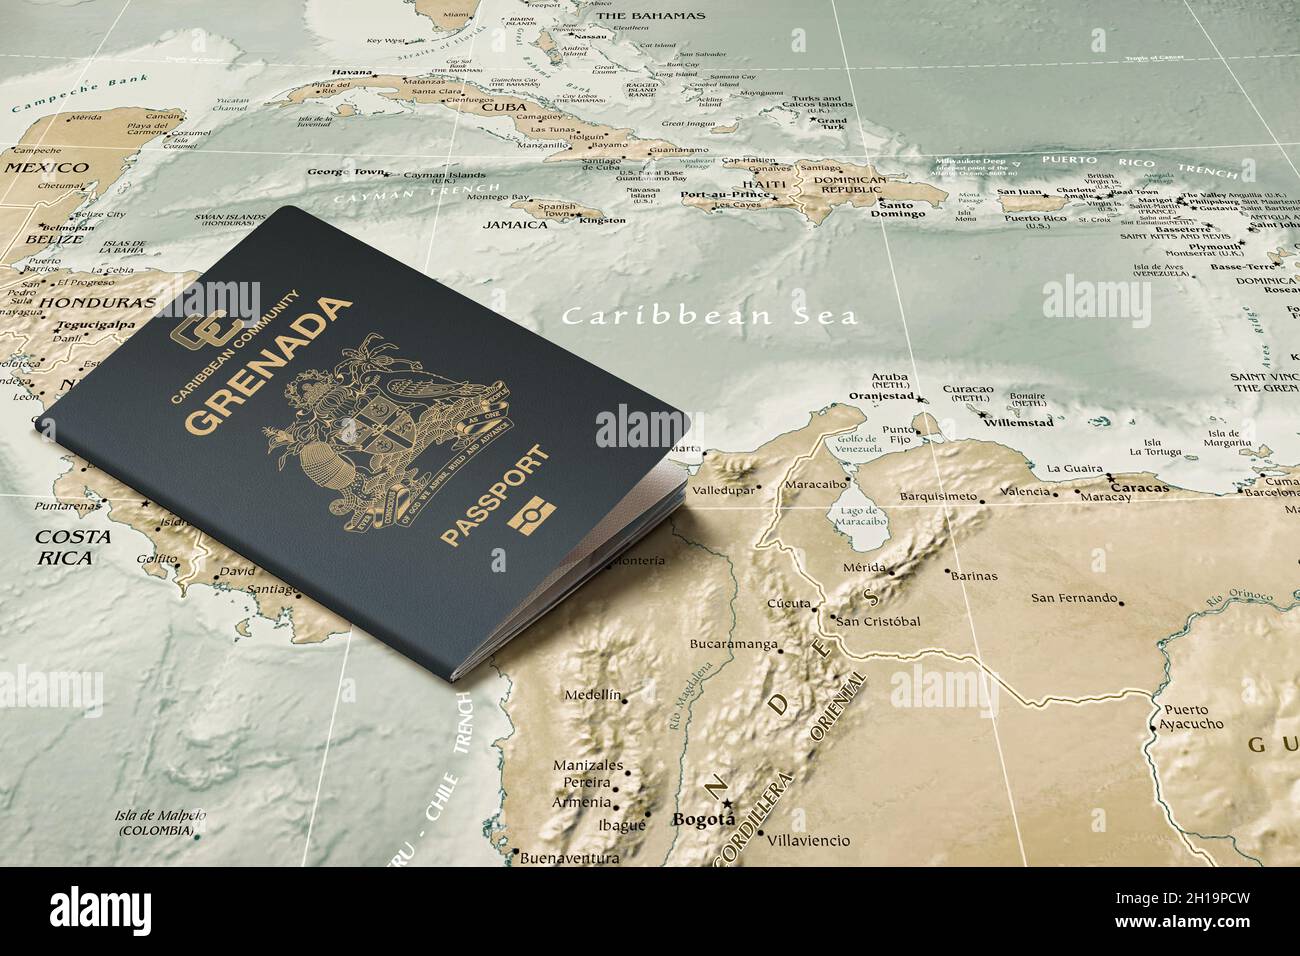 Grenada passport, one of the Caribbean countries, located in the Caribbean Sea Stock Photo